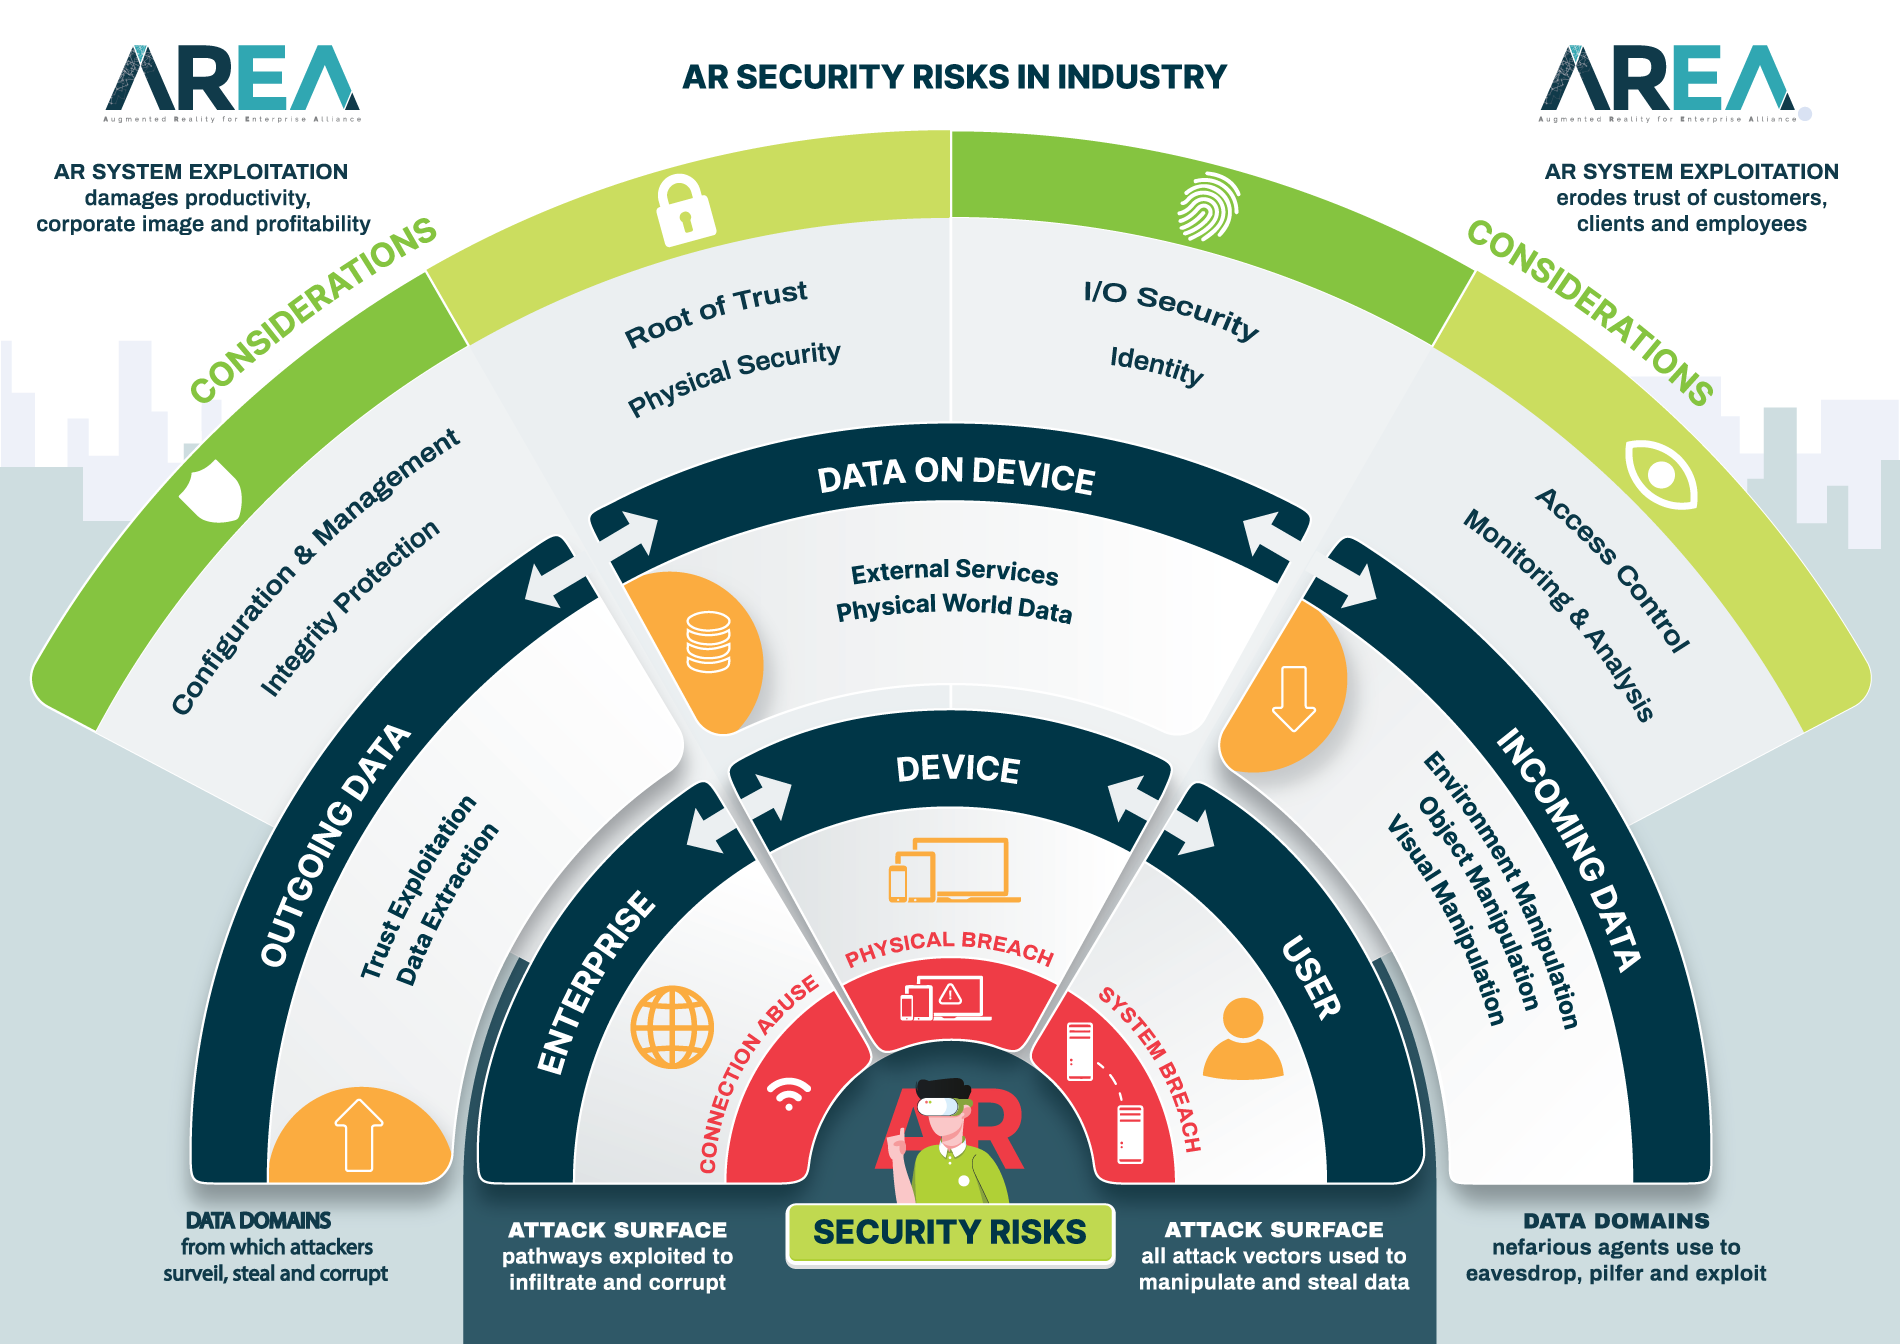 The AREA Security Infographic